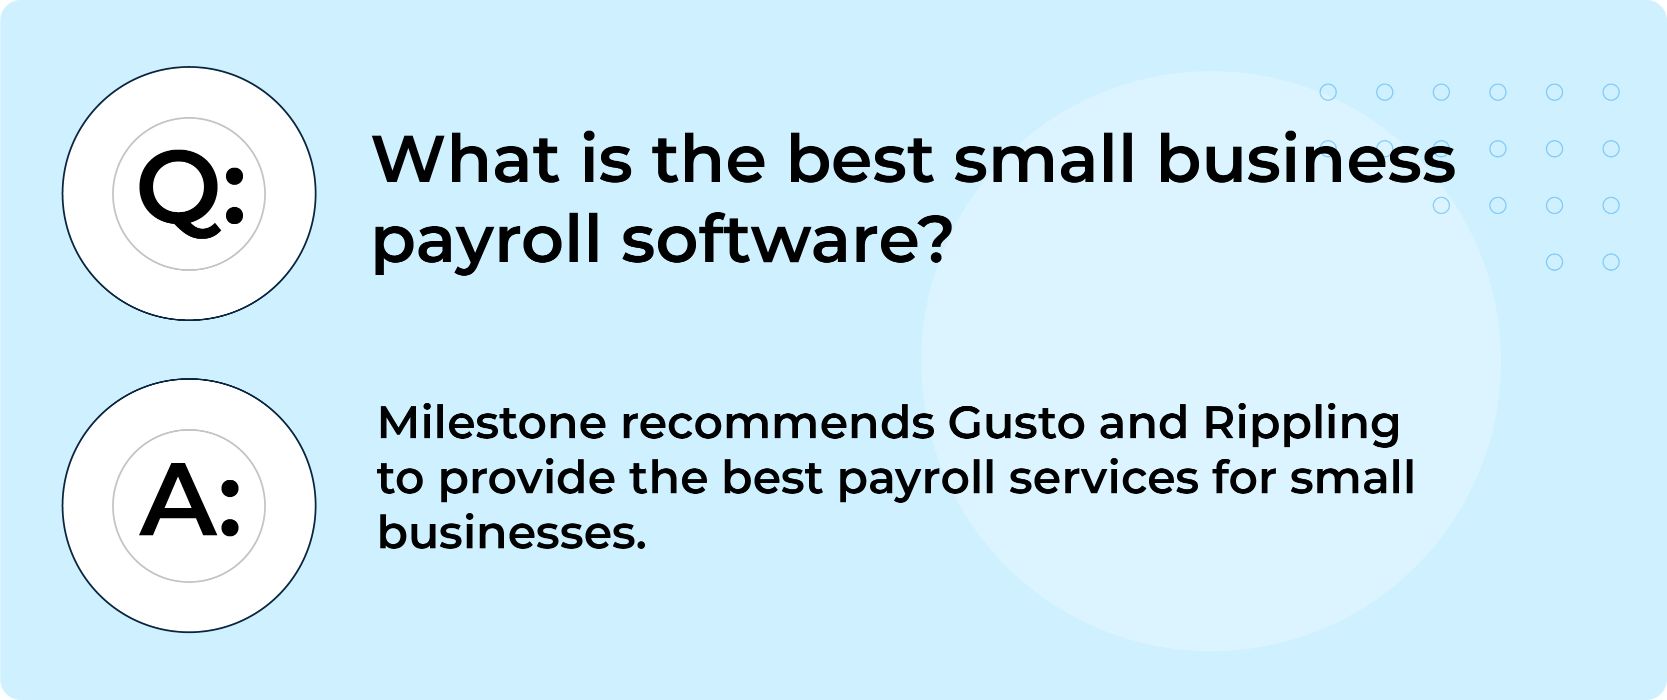 How to choose the best payroll service for a small business